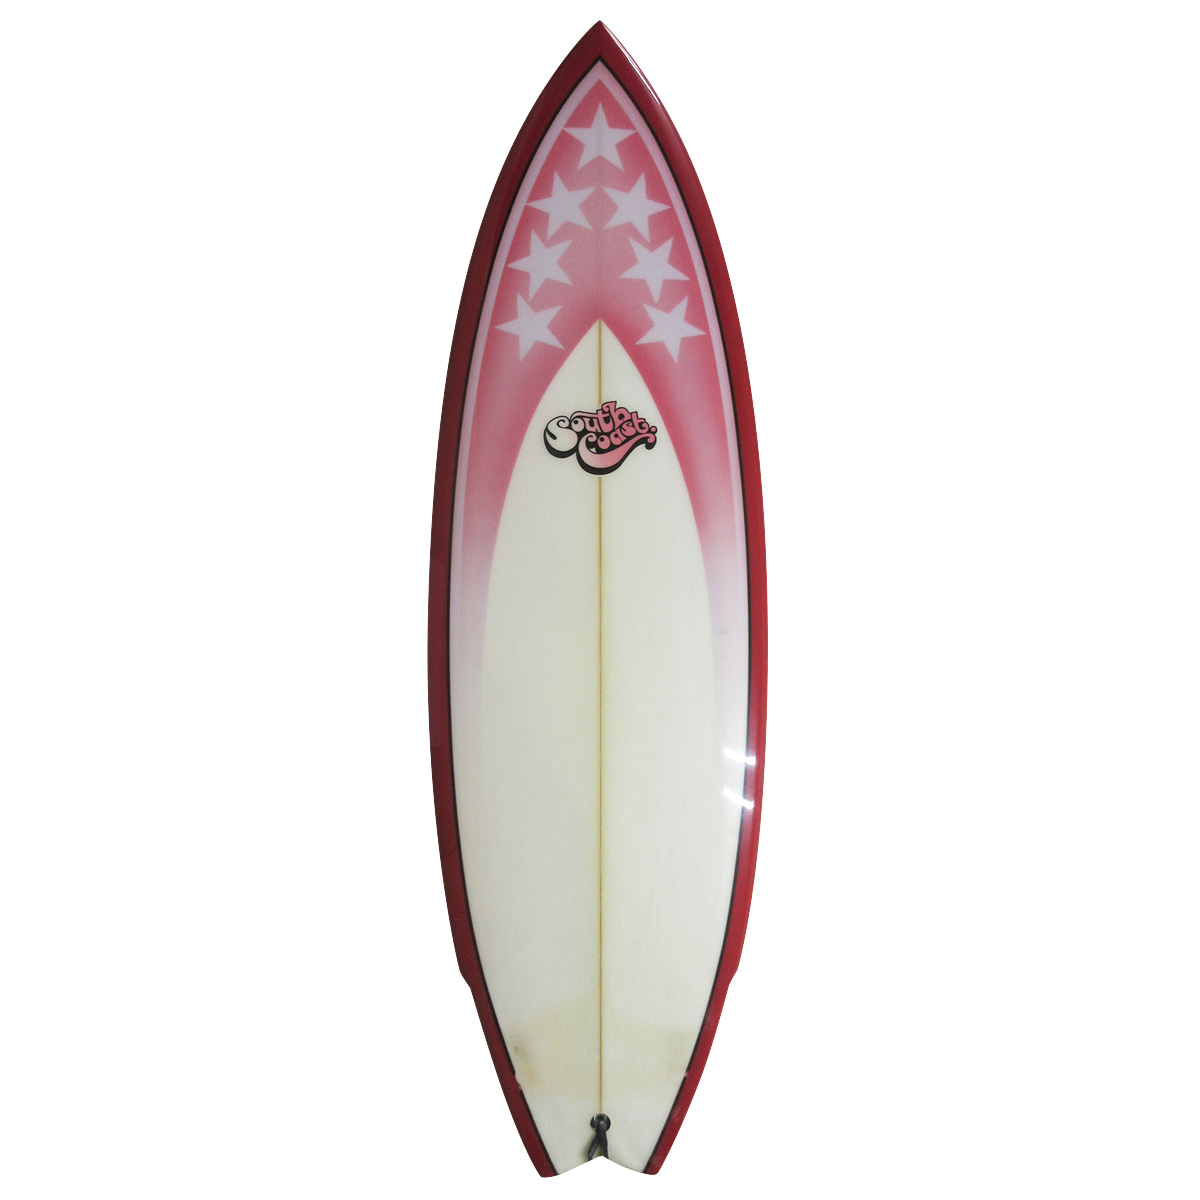 SOUTH COAST SURFBOARDS / Wing Swallow 5'10